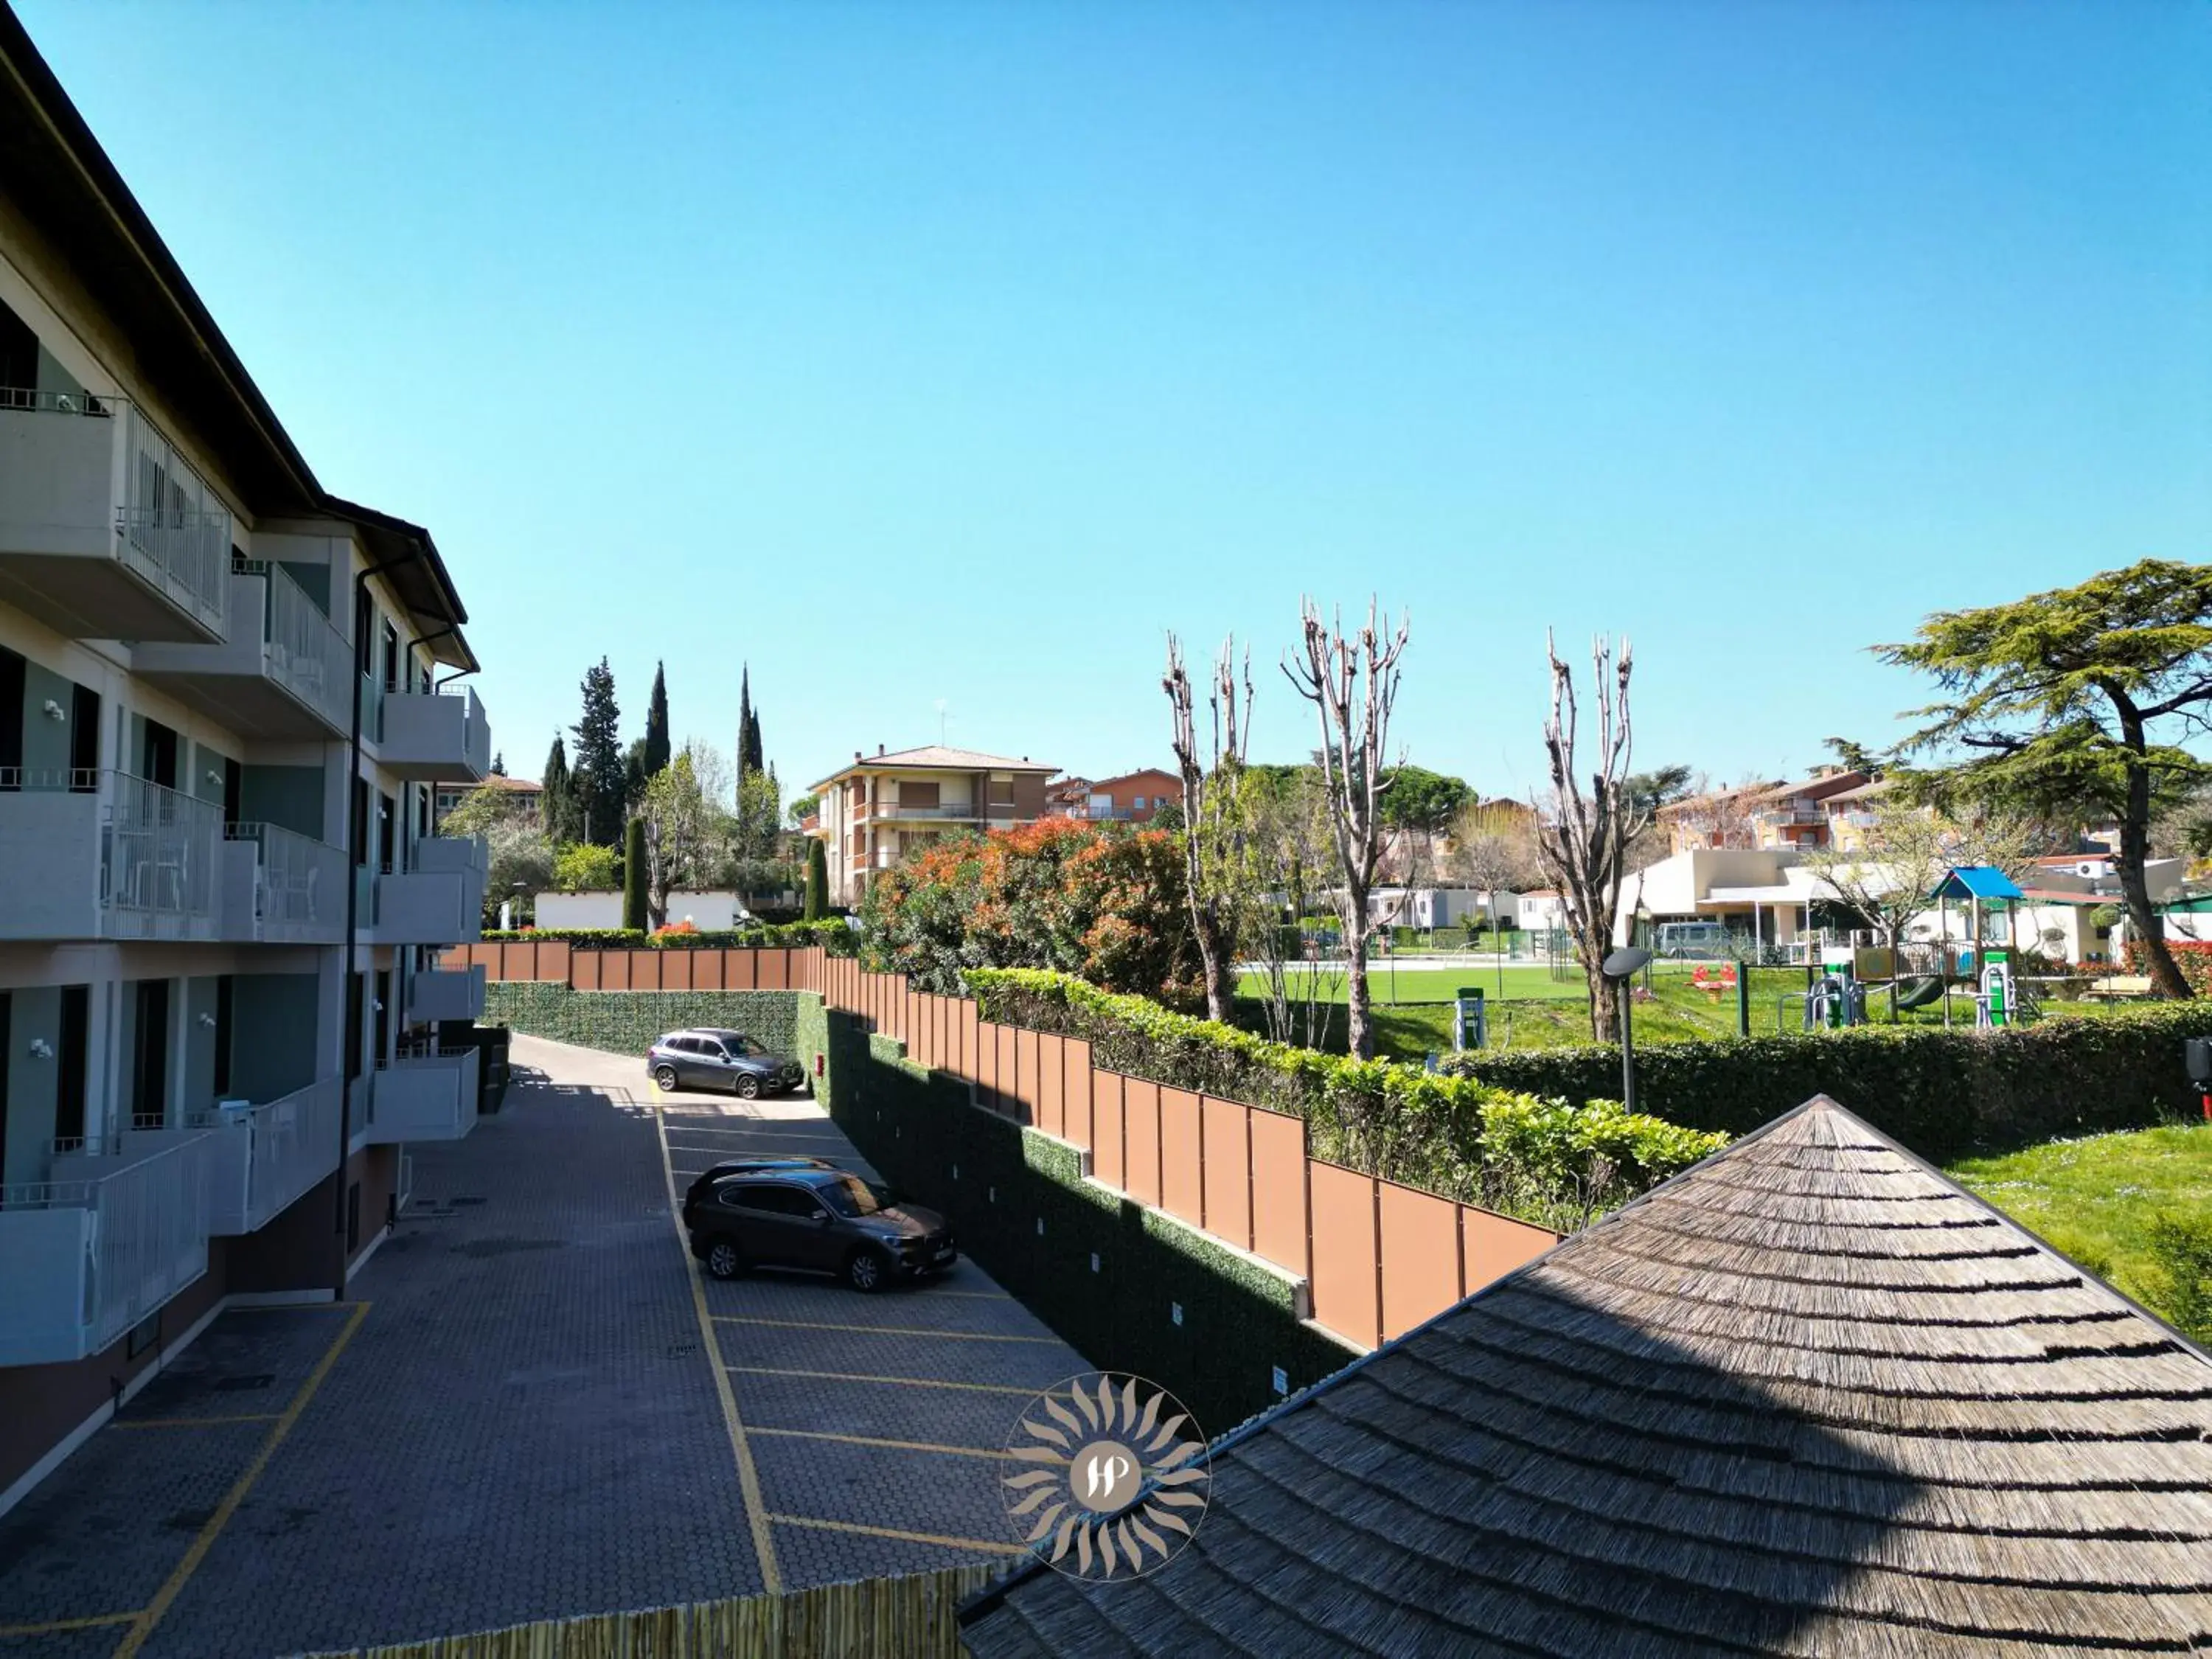 Area and facilities in Hotel Puccini